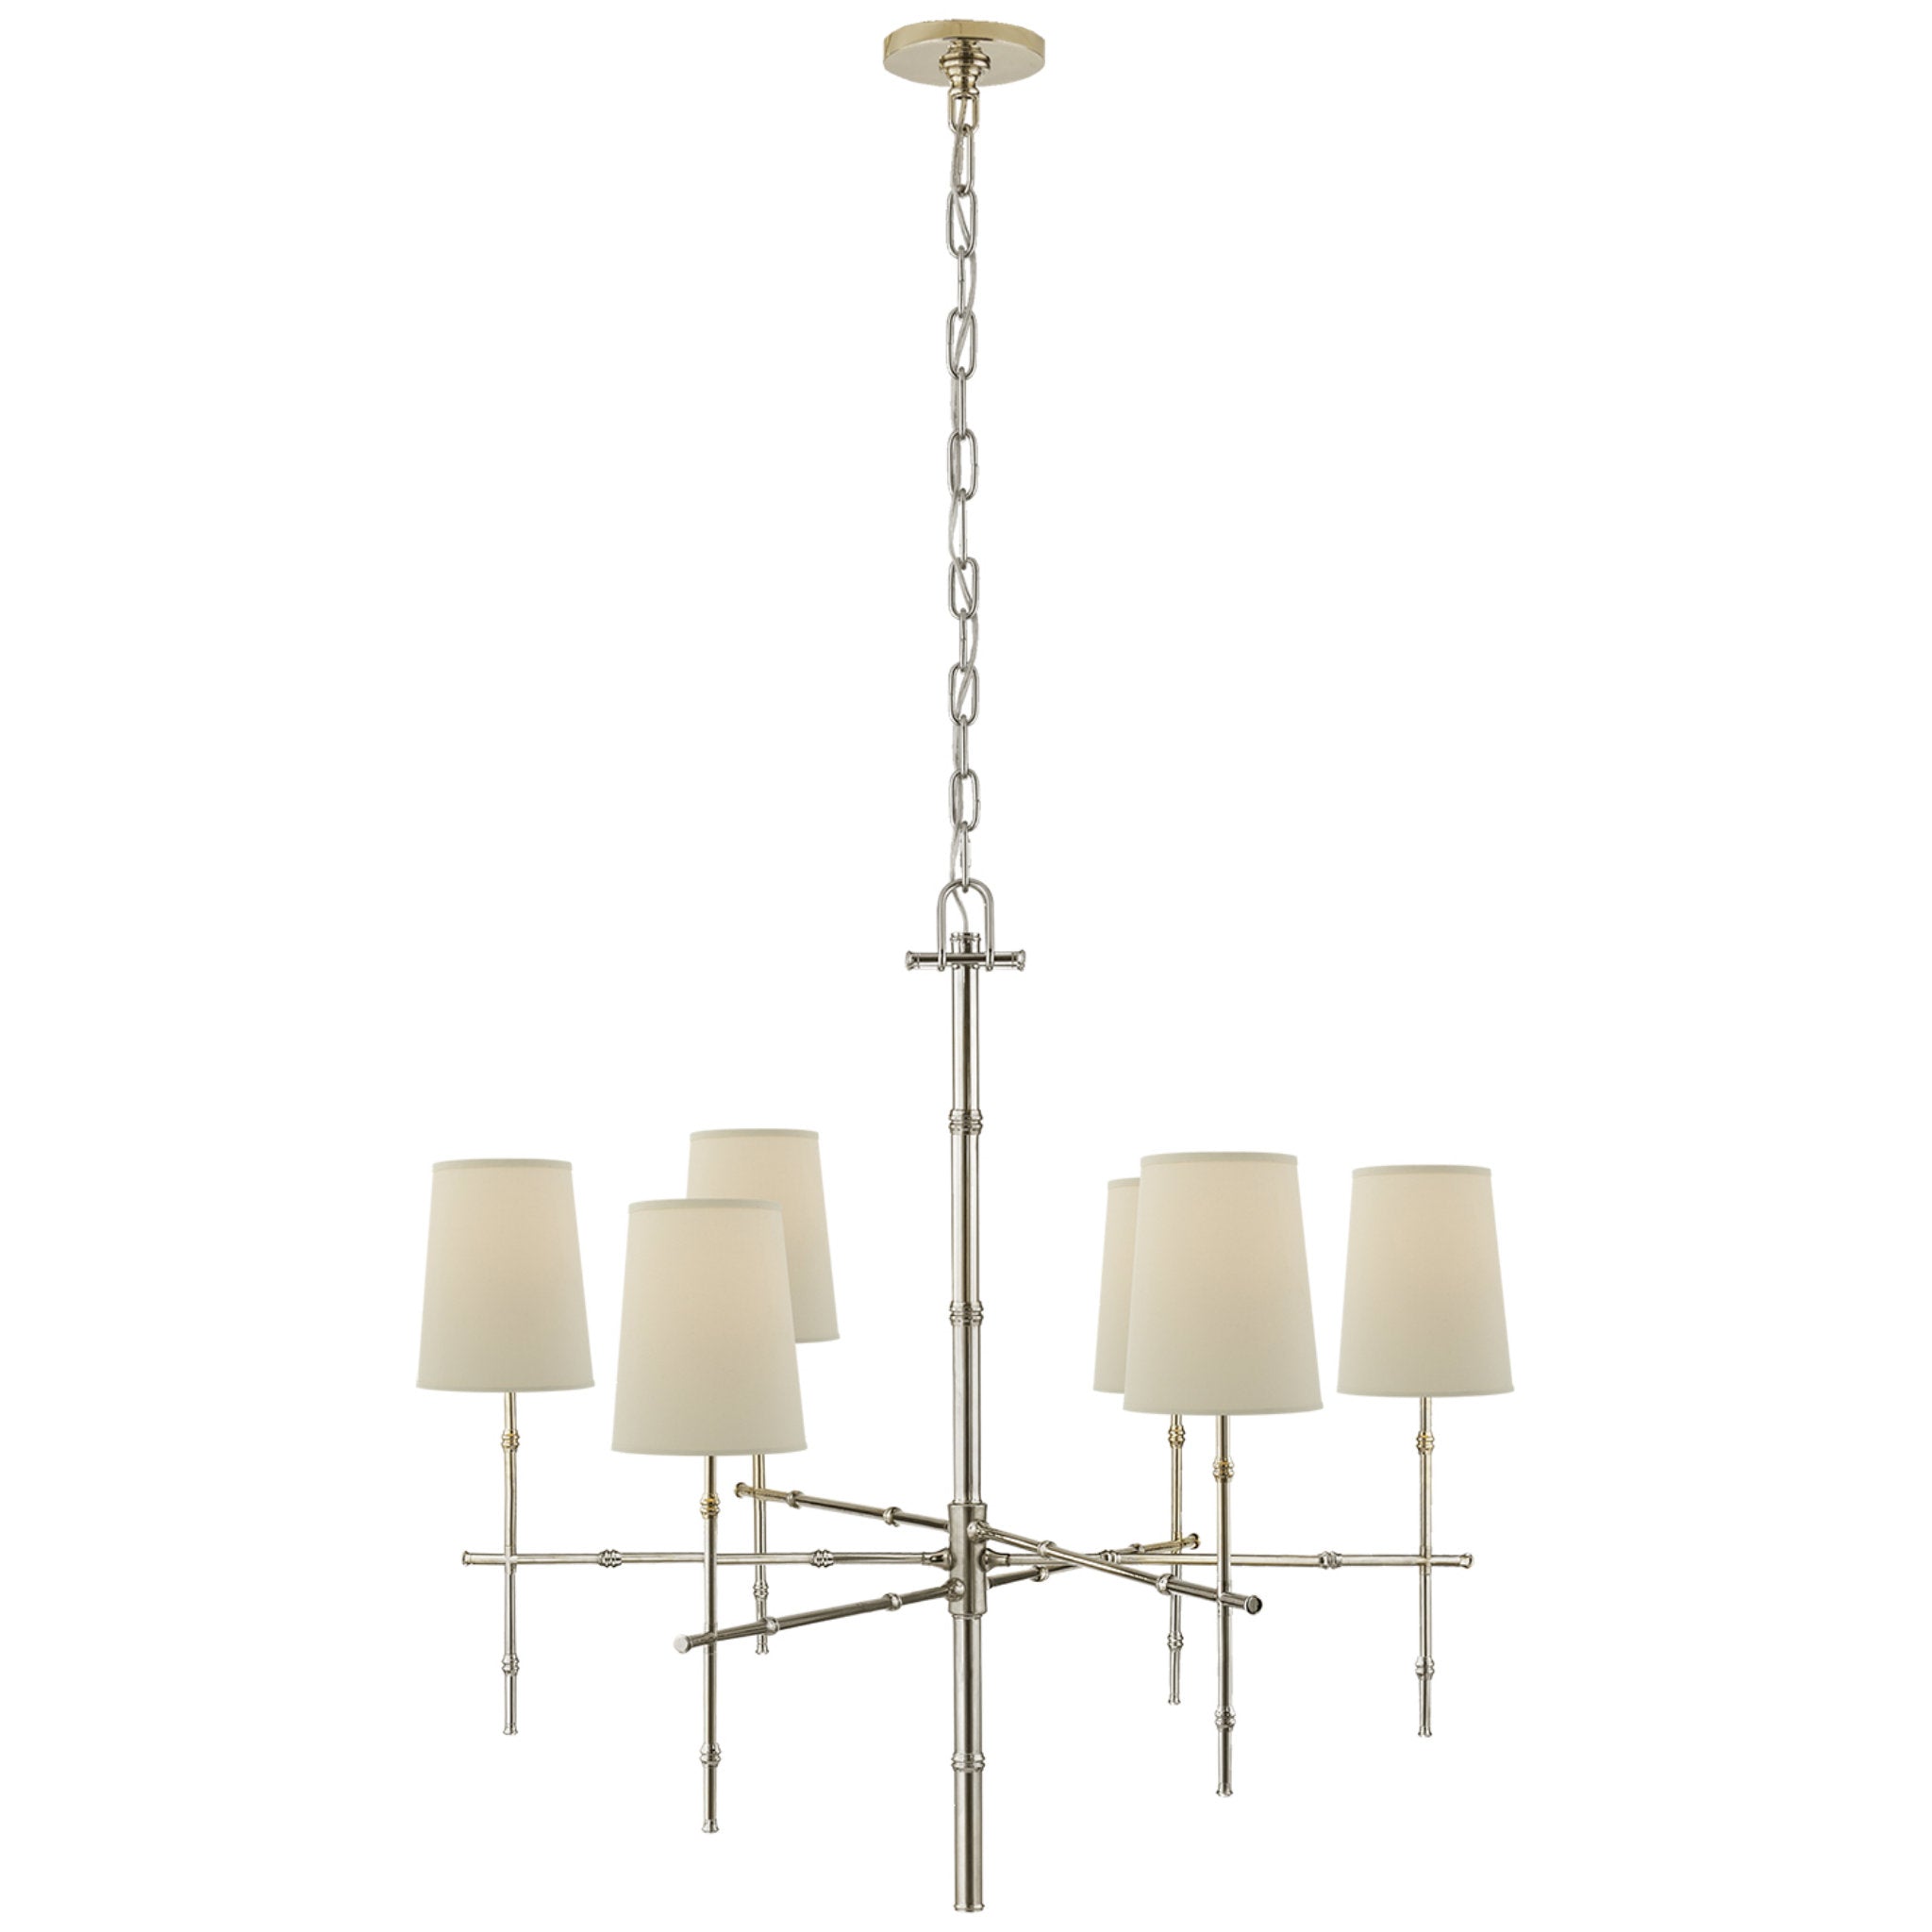 Visual Comfort Grenol Medium Modern Bamboo Chandelier in Polished Nickel with Natural Percale Shades